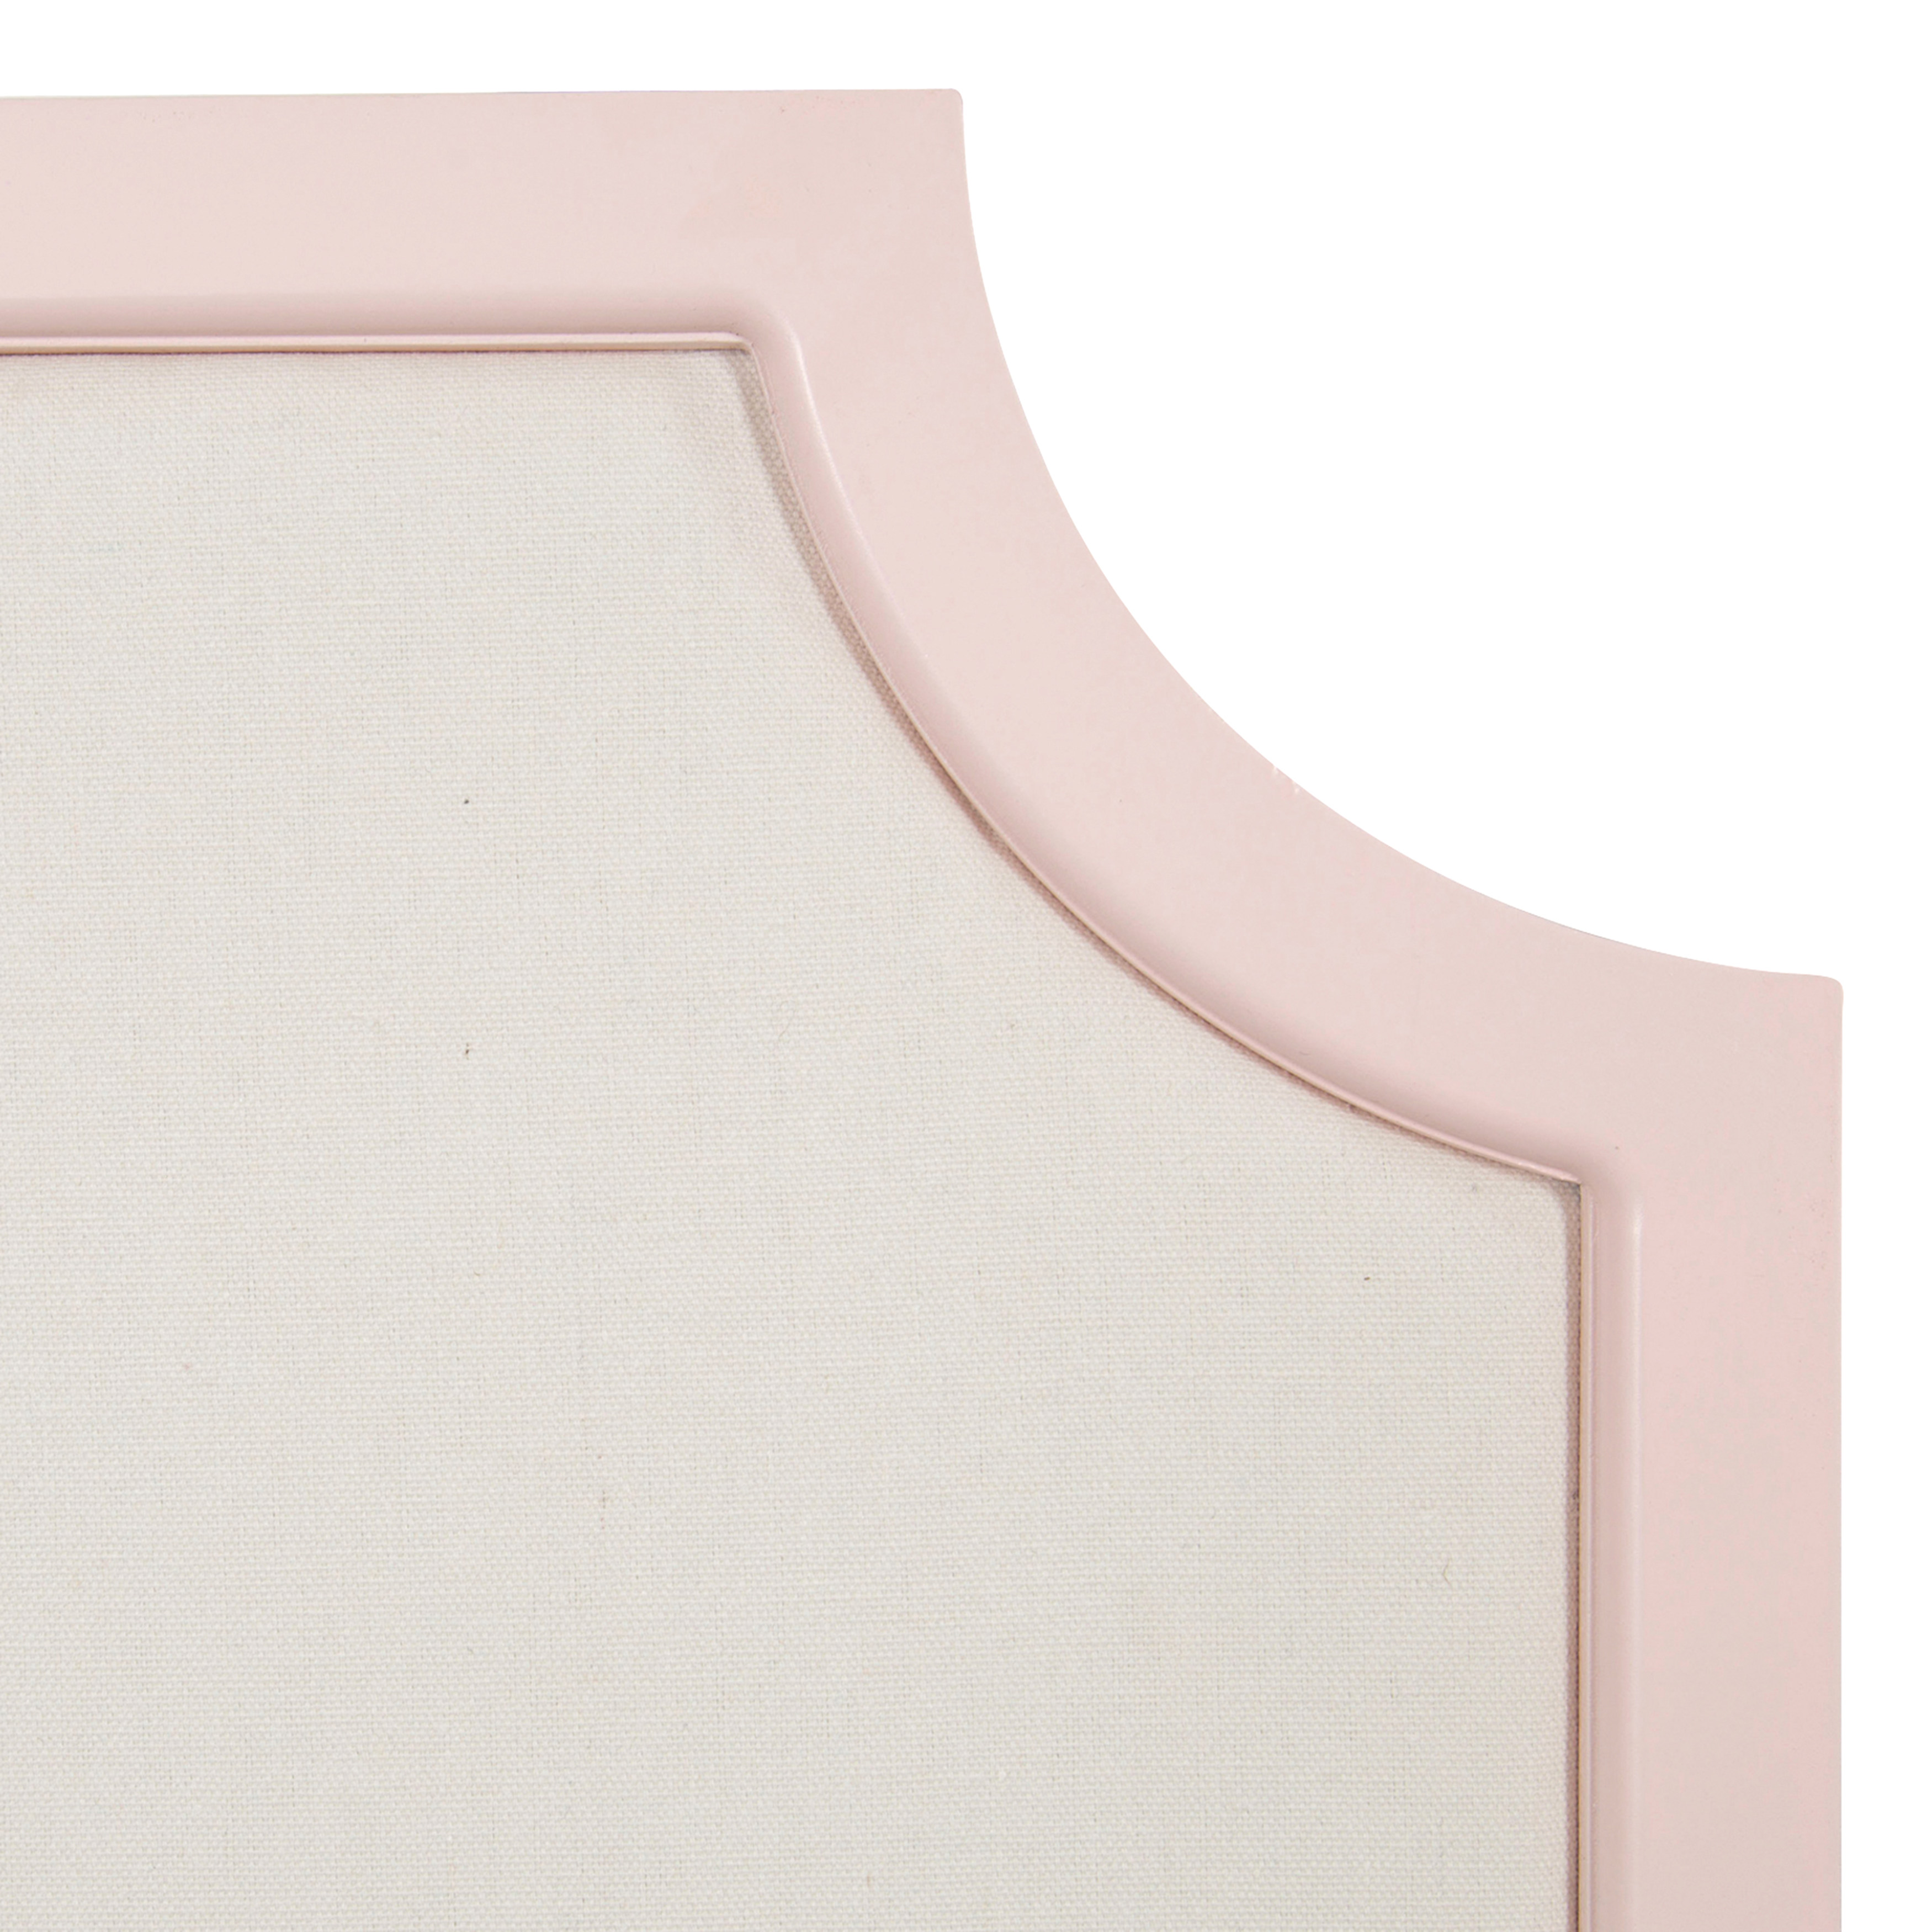 Kate and Laurel Hogan Wood Framed Fabric Pinboard with Scallop Corners, 24  x 36 Inches, Pink and White